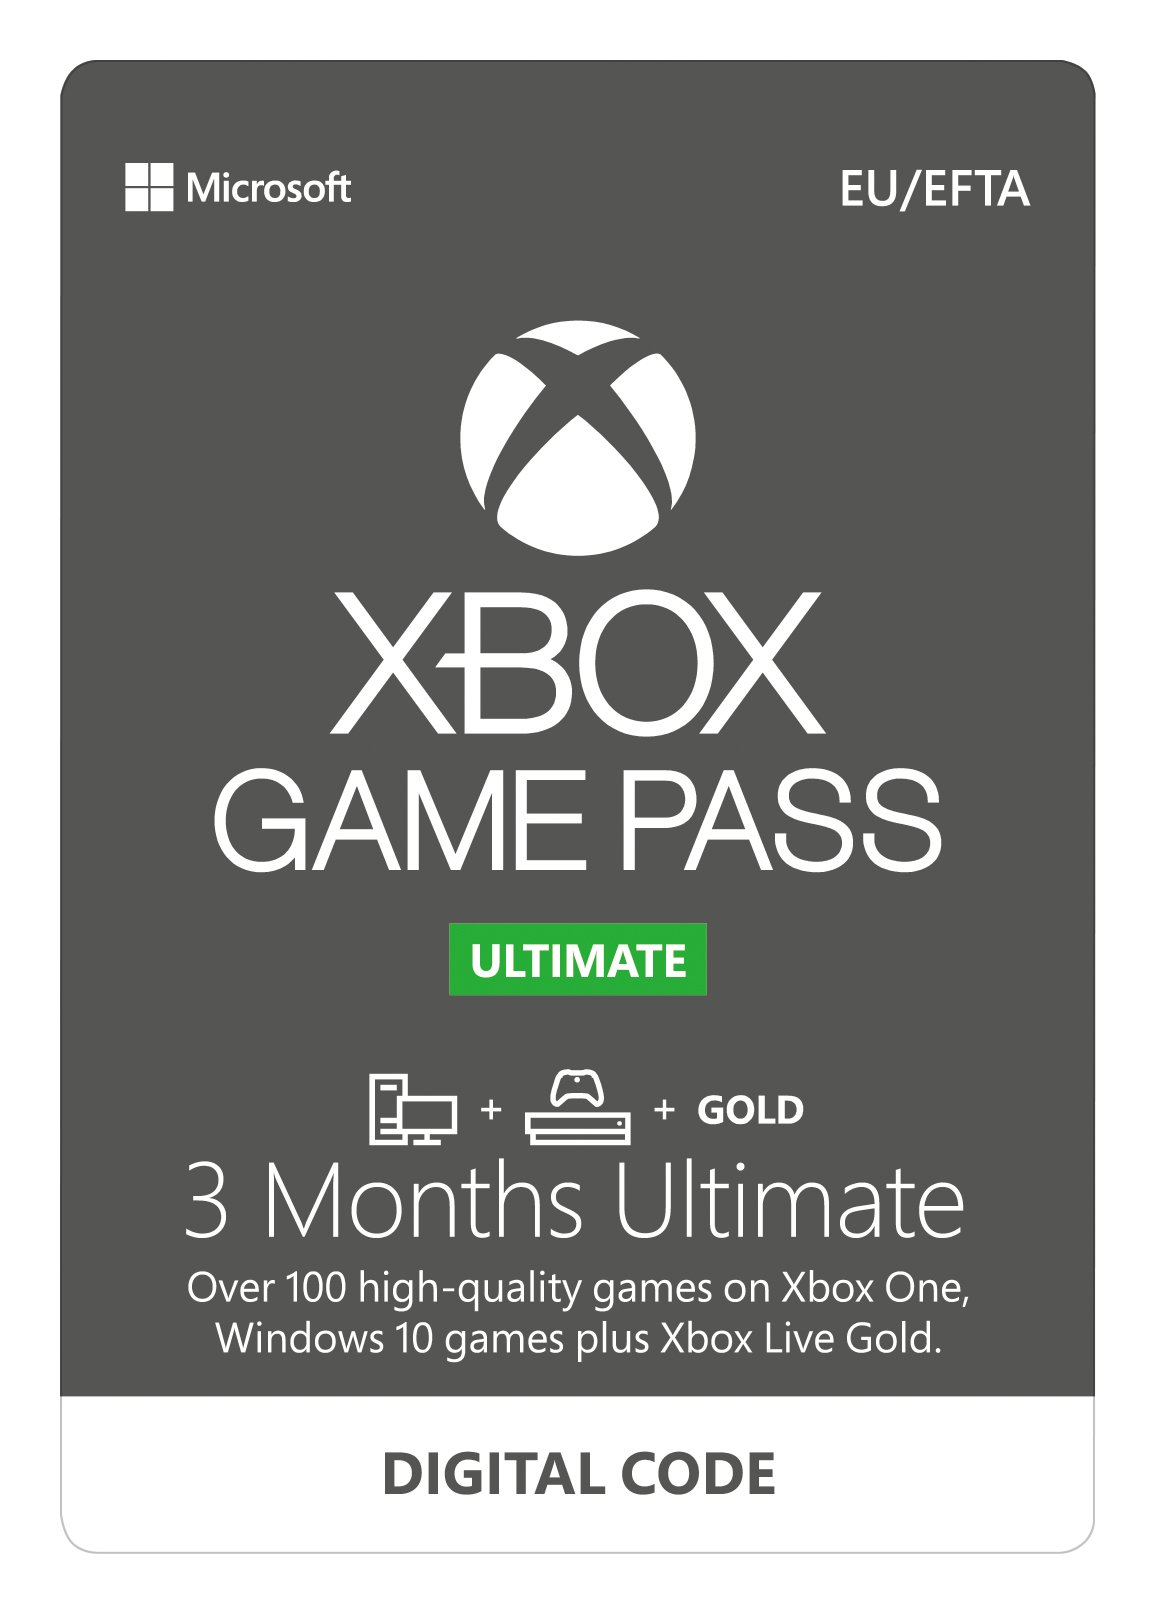 xbox game pass ultimate cost 12 month subscription